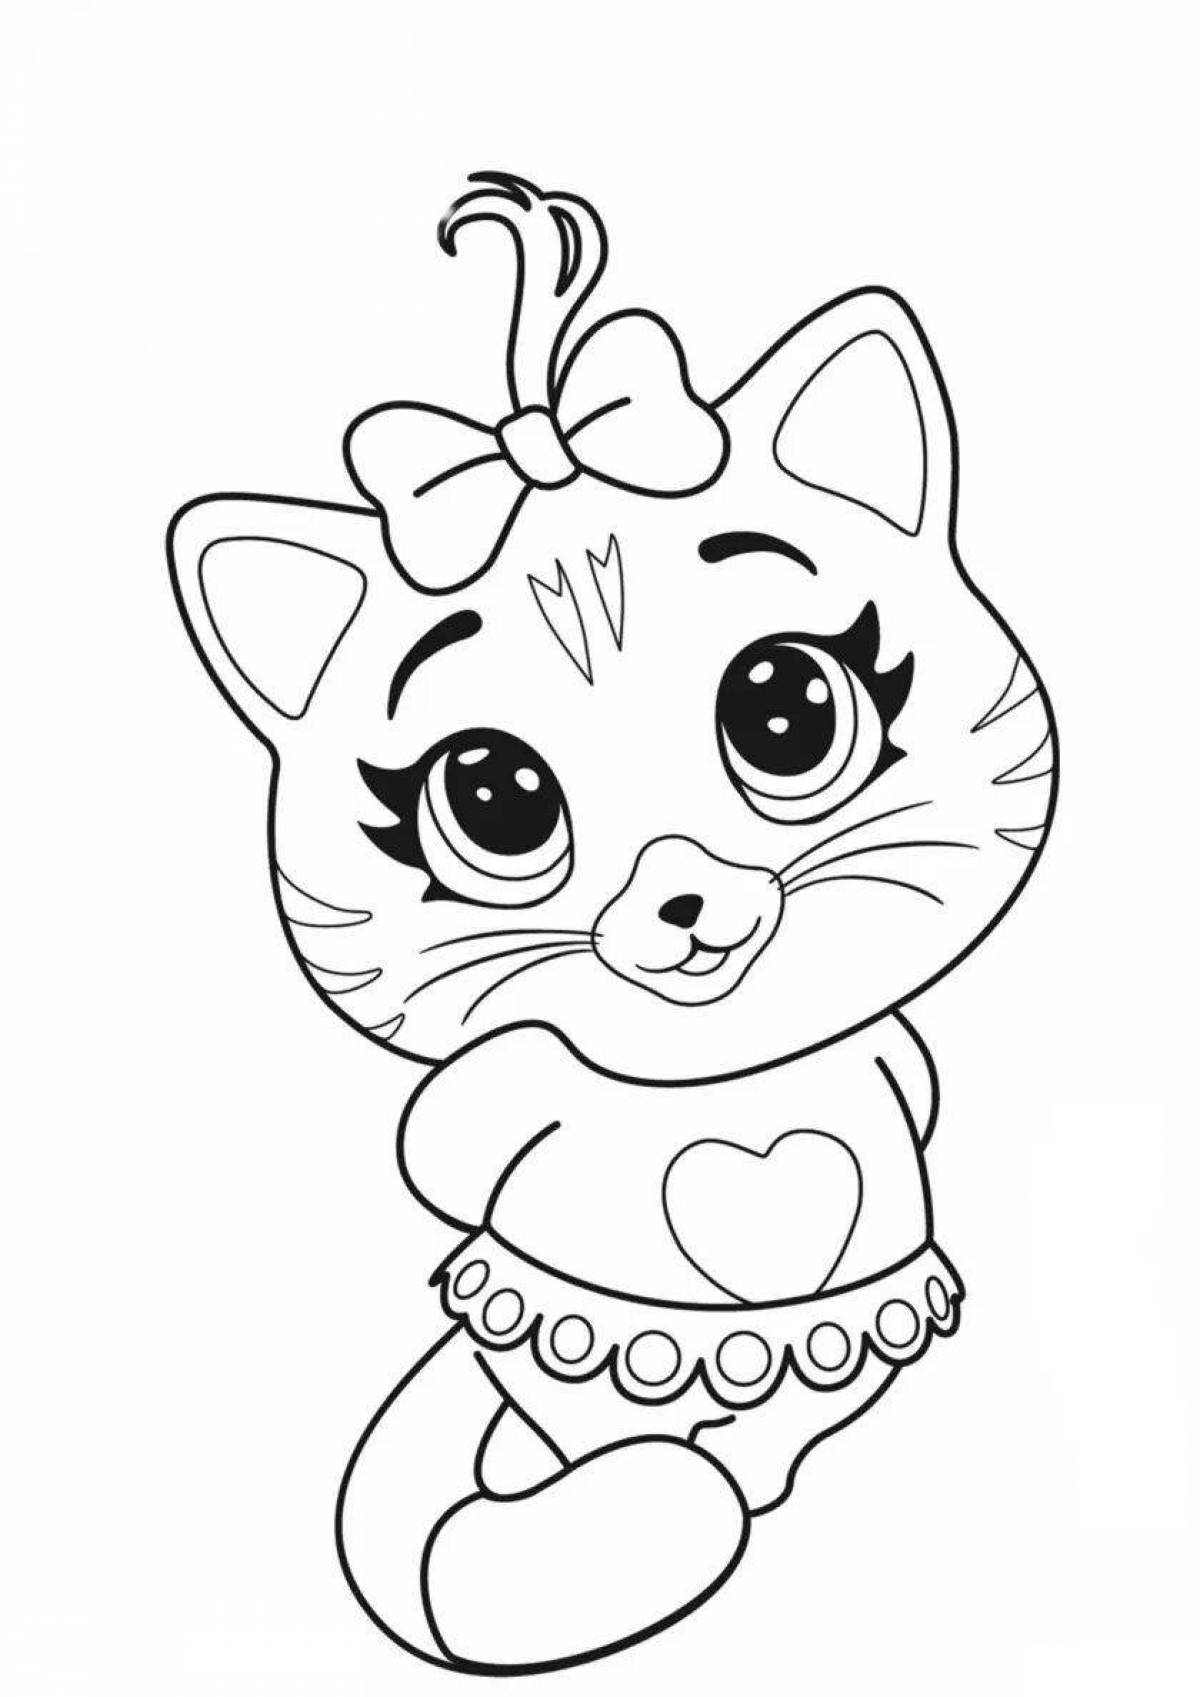 Cunning cat coloring page